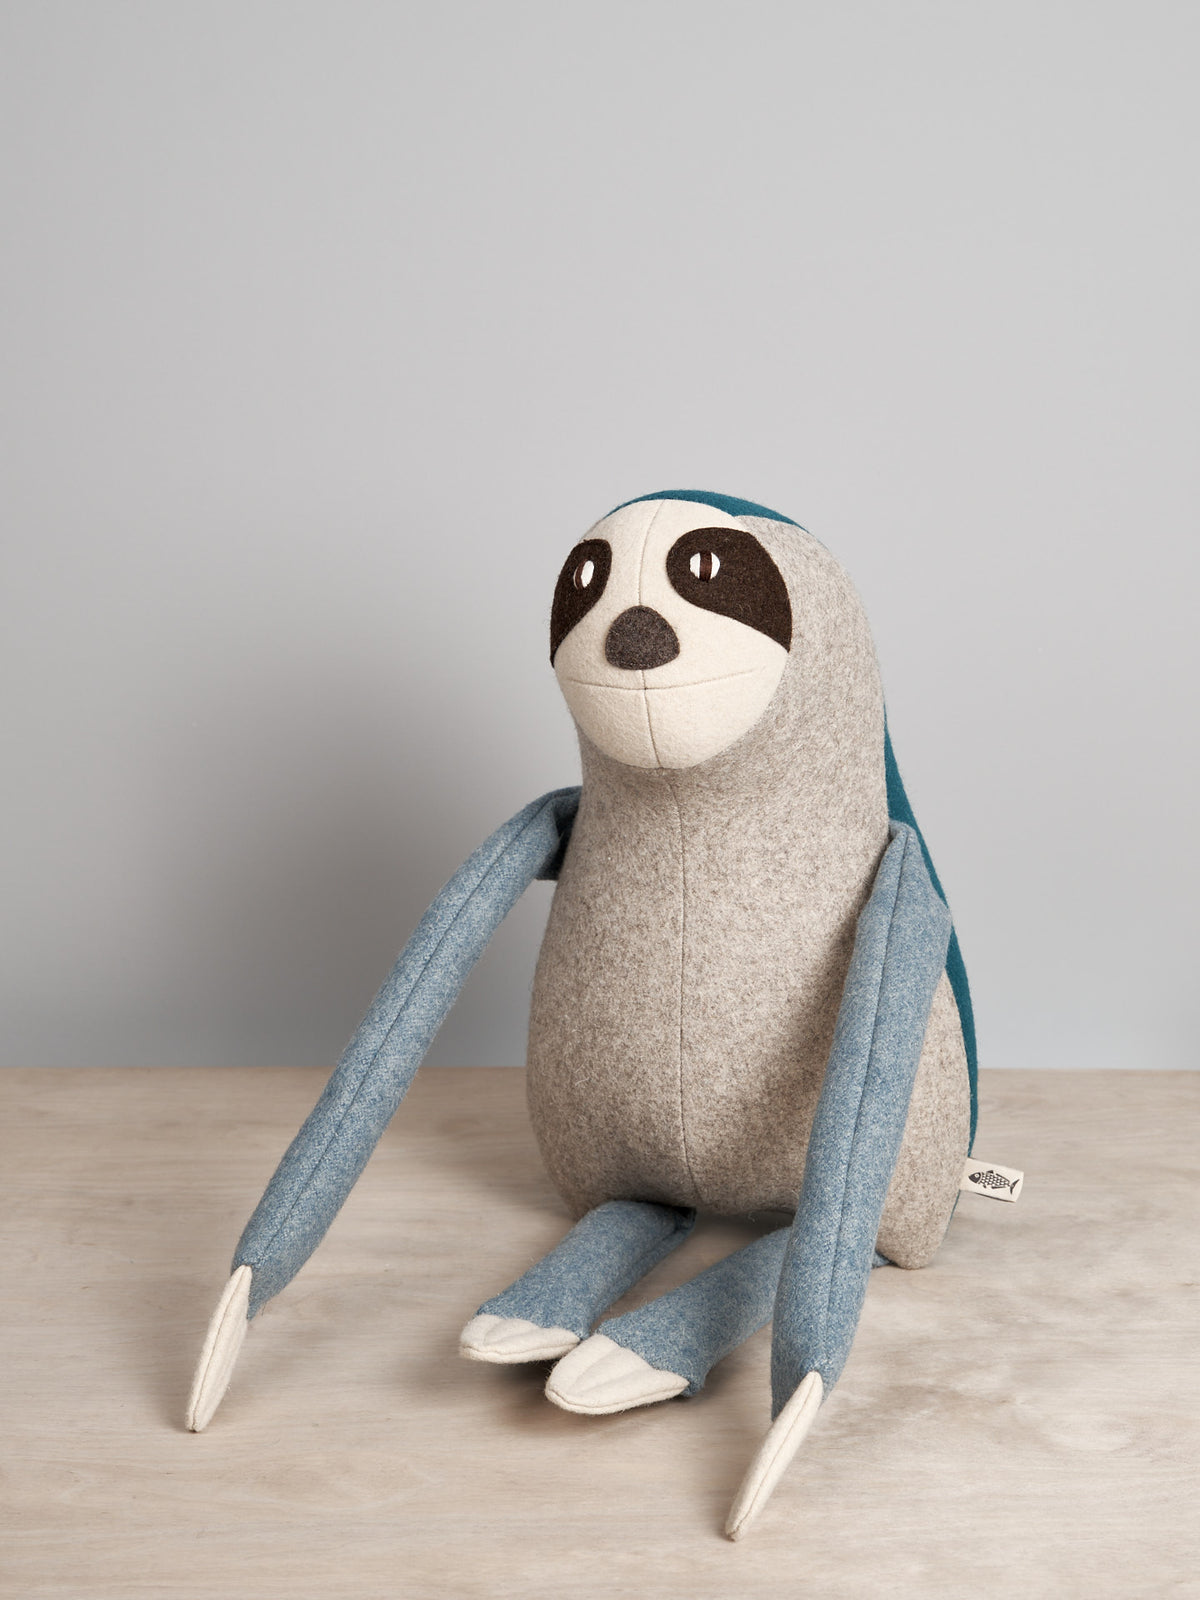 A NED, the Brown-Throated Sloth stuffed animal sitting on a wooden table from Carapau.